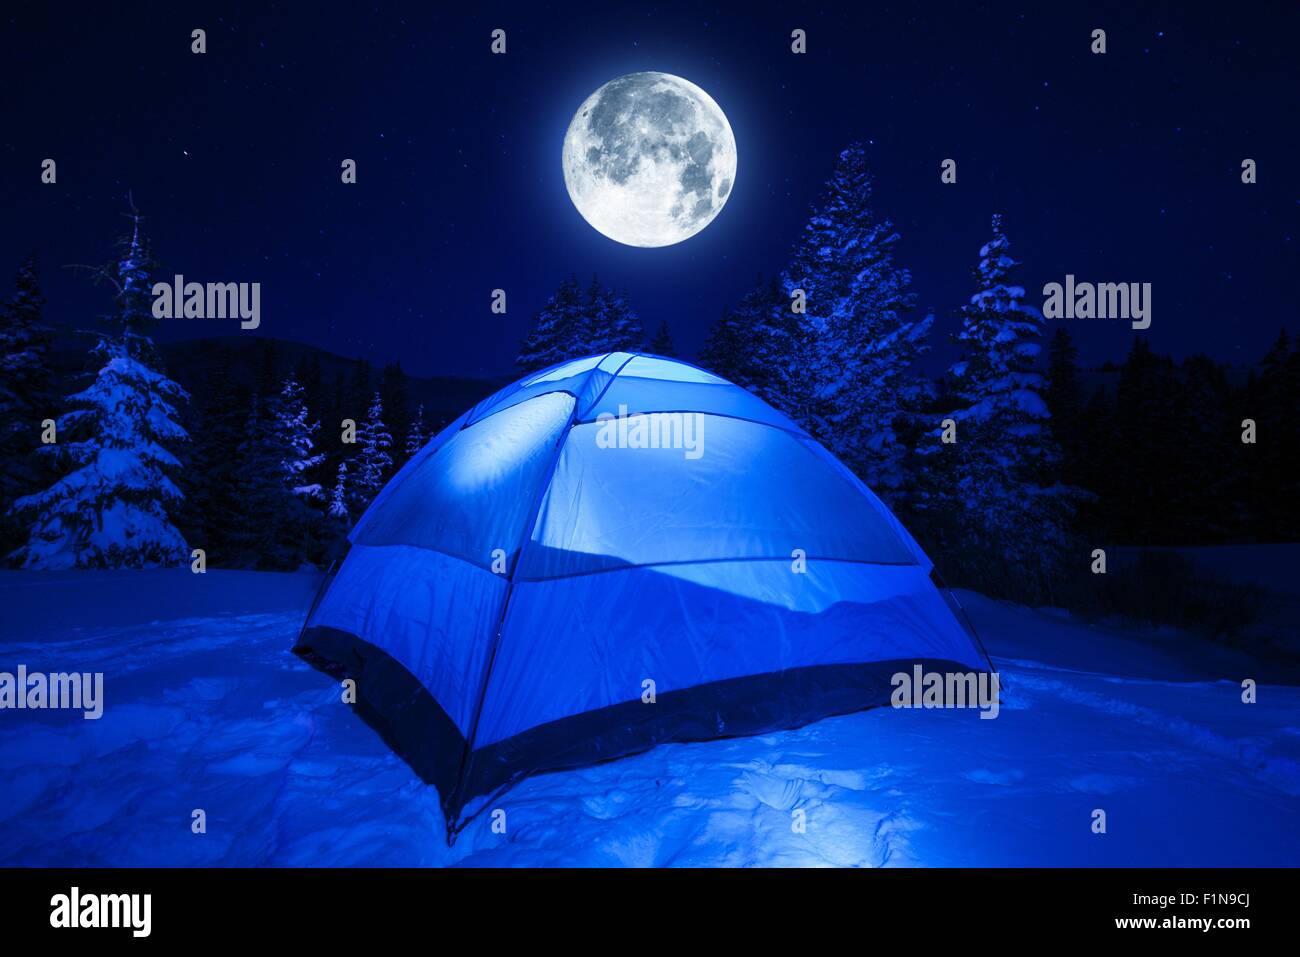 Winter Night Camping in Heavy Mountains Snow. Large Full Moon on the NIght Sky. Outdoor and Recreation Theme. Stock Photo